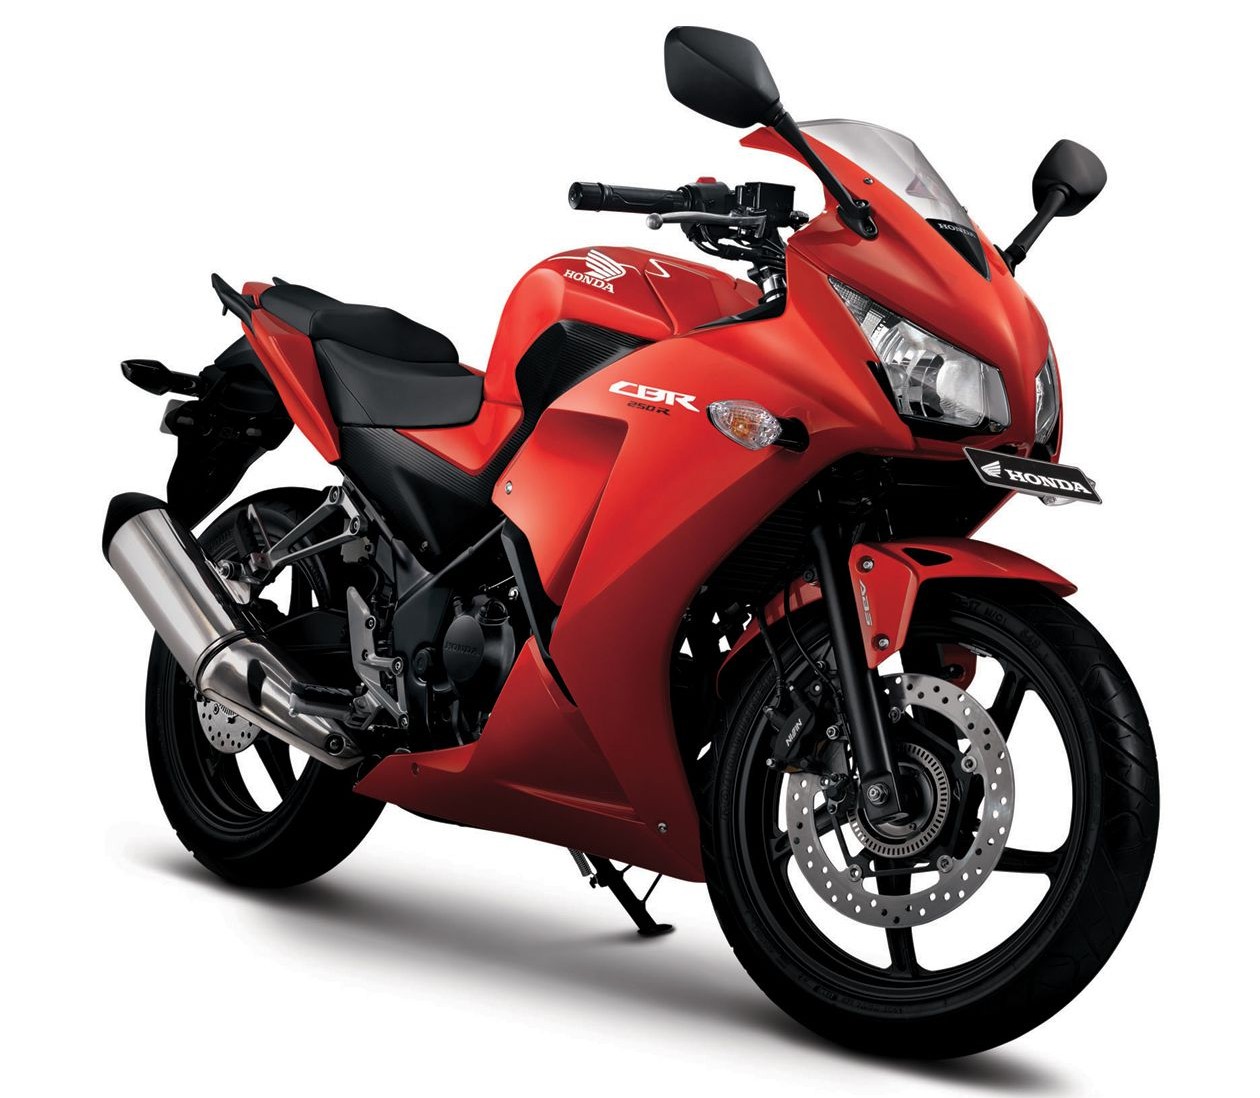 New 2015 Honda CBR250R Launched With More Power & Twin Headlamps in Indonesia